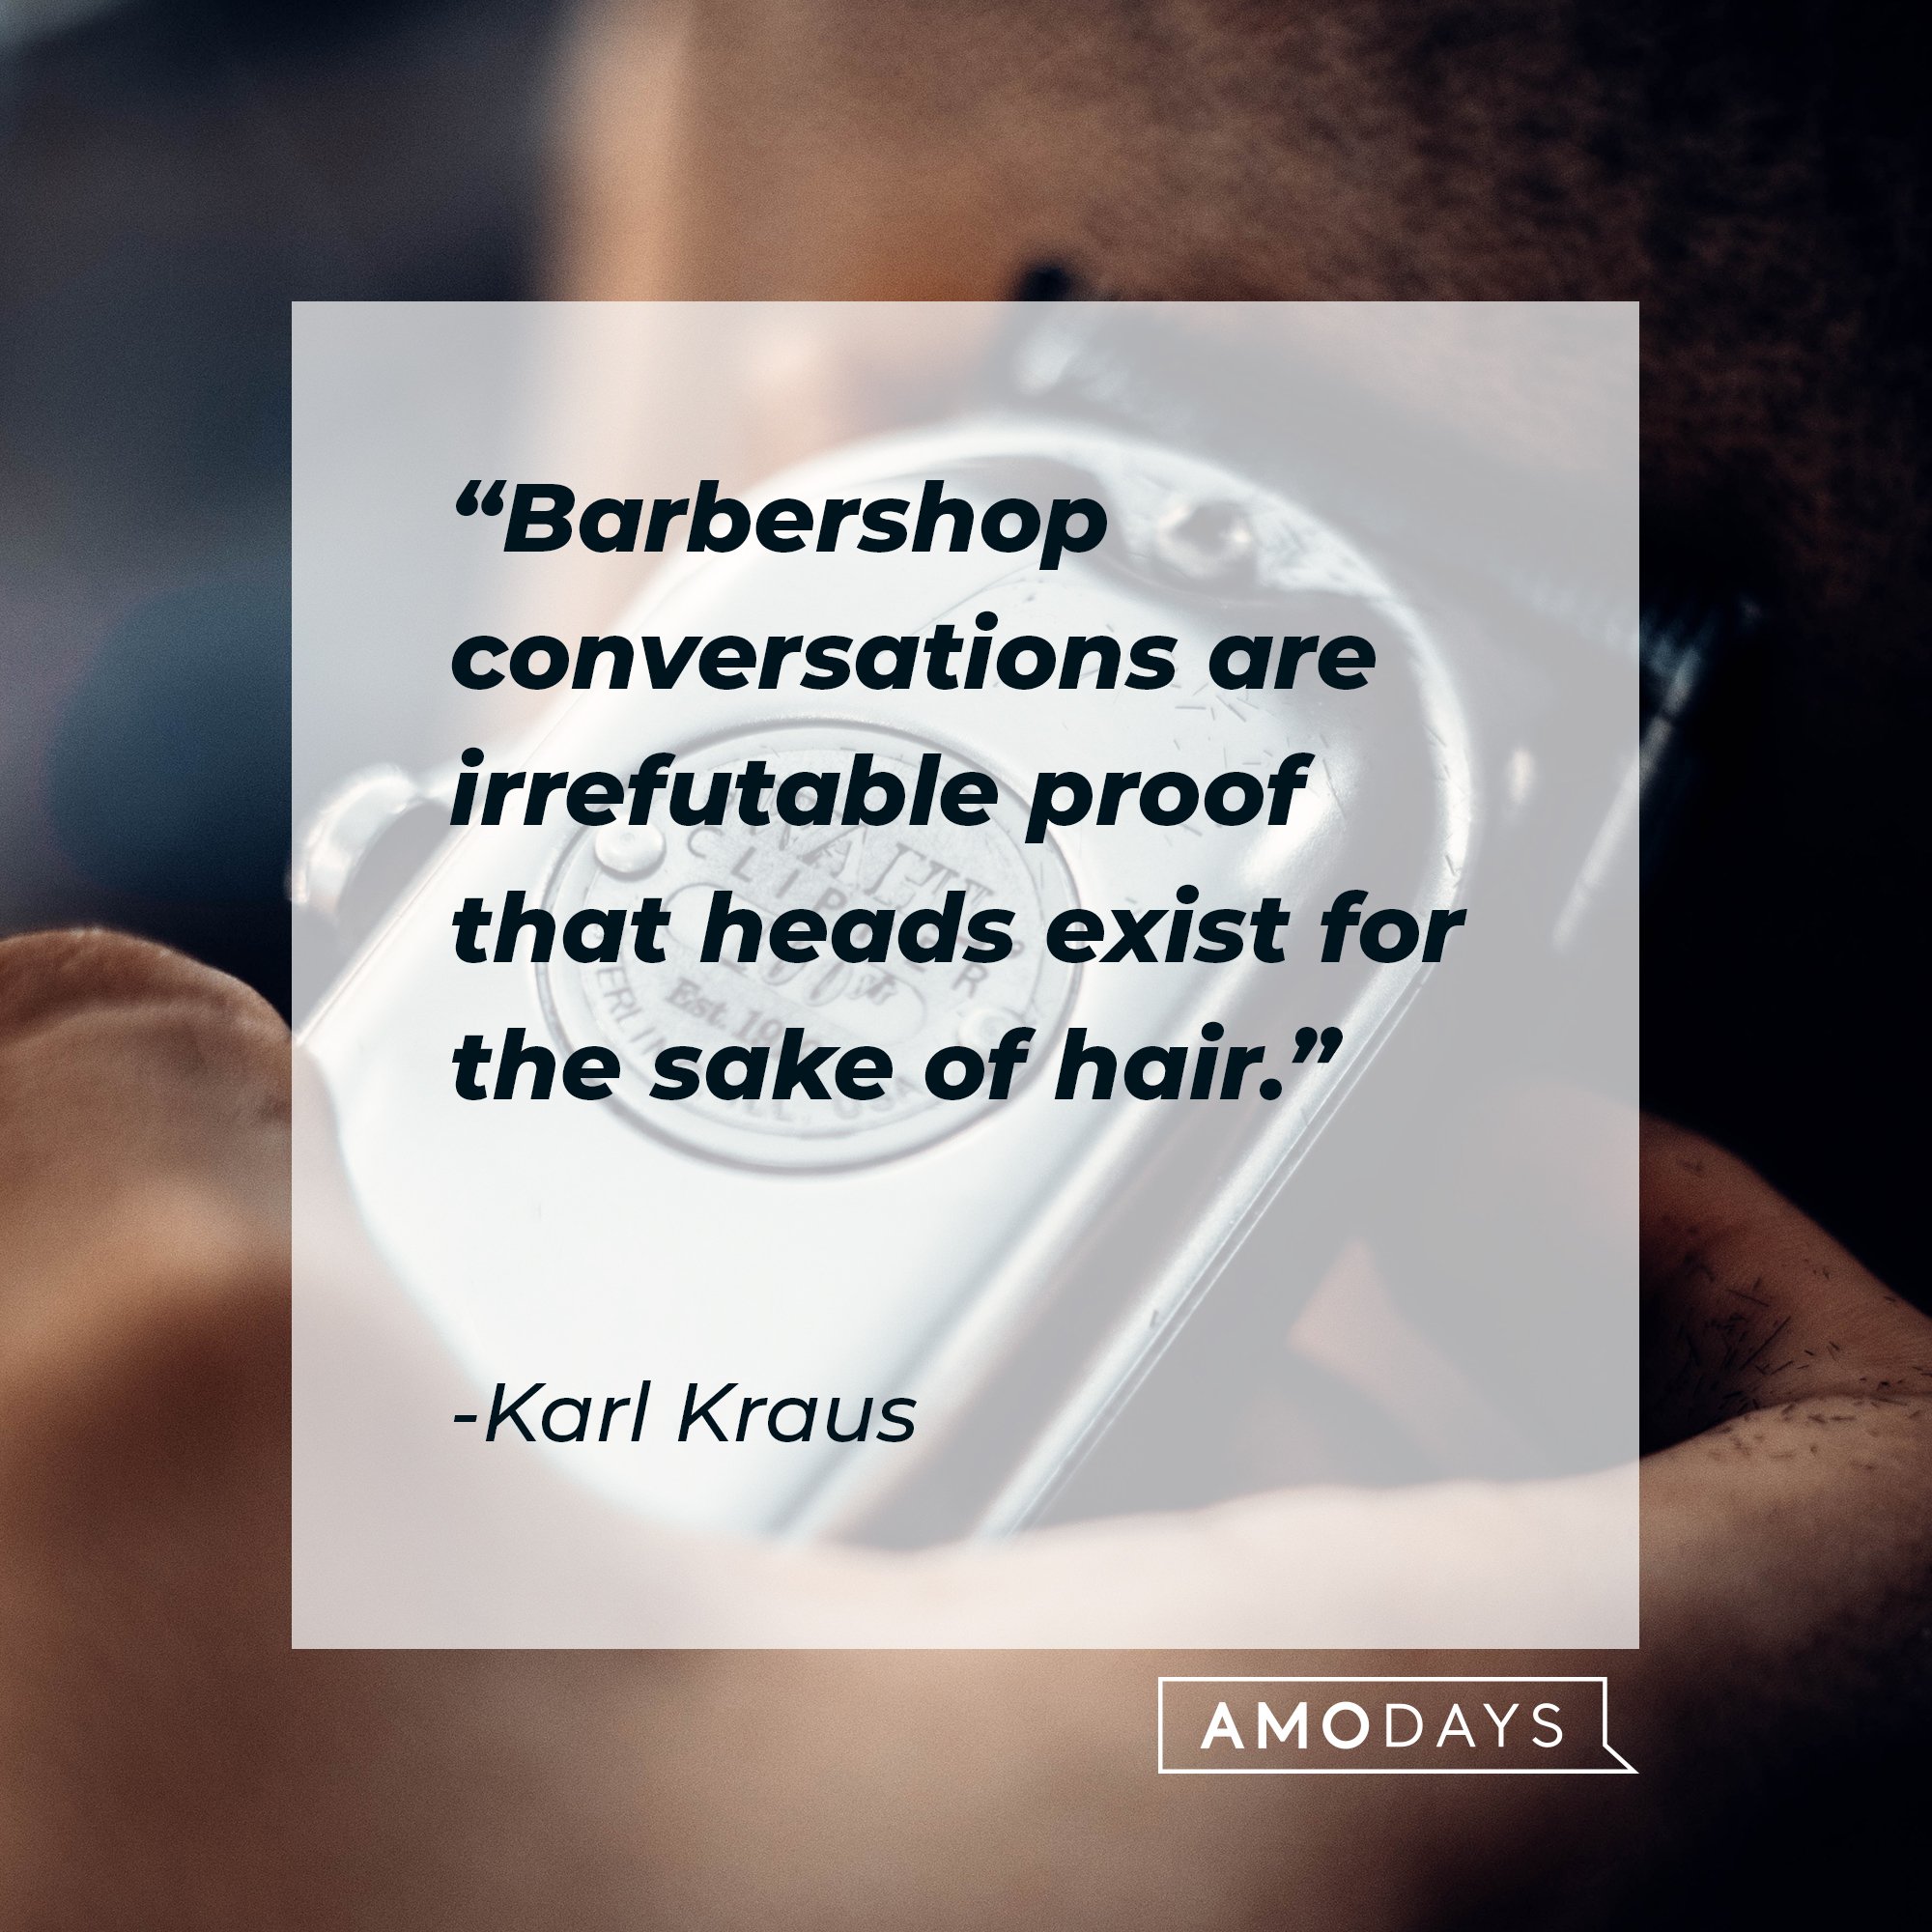 Karl Kraus's quote: "Barbershop conversations are irrefutable proof that heads exist for the sake of hair." | Image: AmoDays